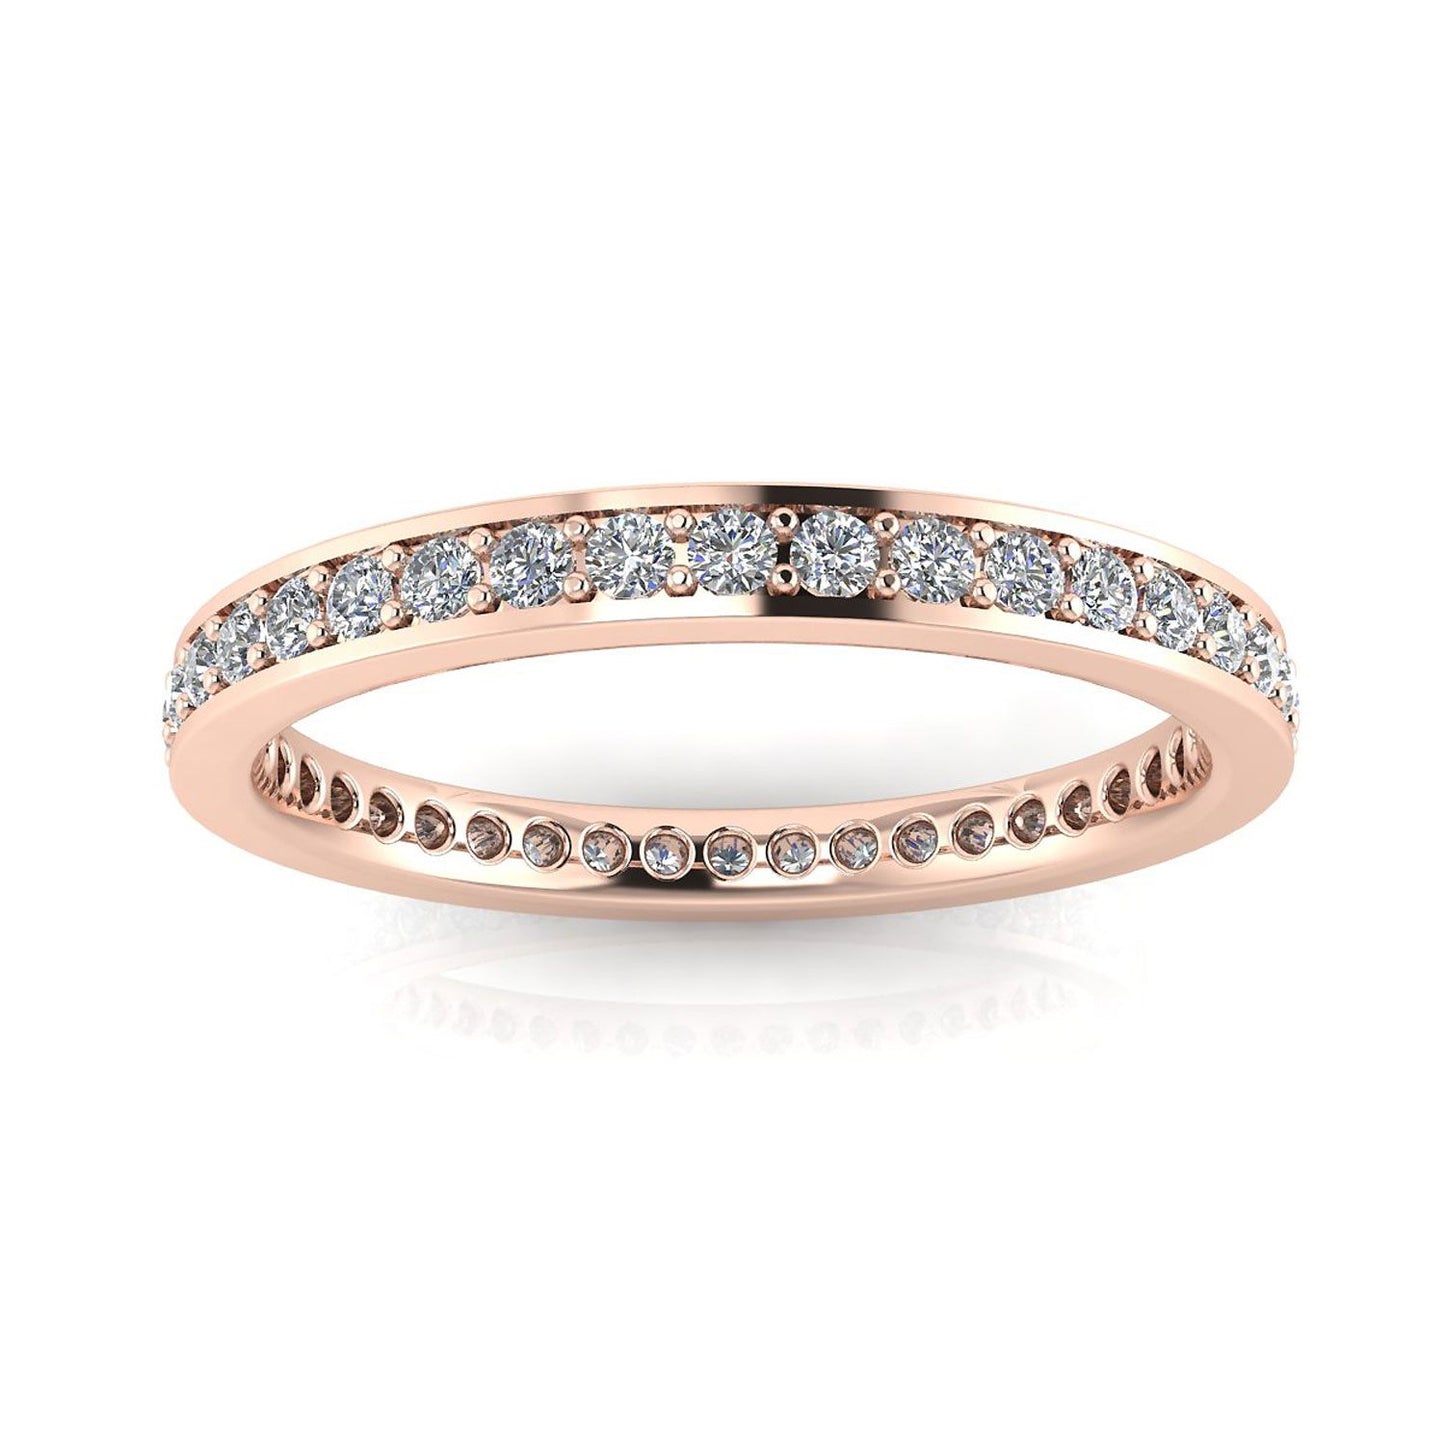 Round Brilliant Cut Diamond Channel Pave Set Eternity Ring In 14k Rose Gold  (0.31ct. Tw.) Ring Size 6